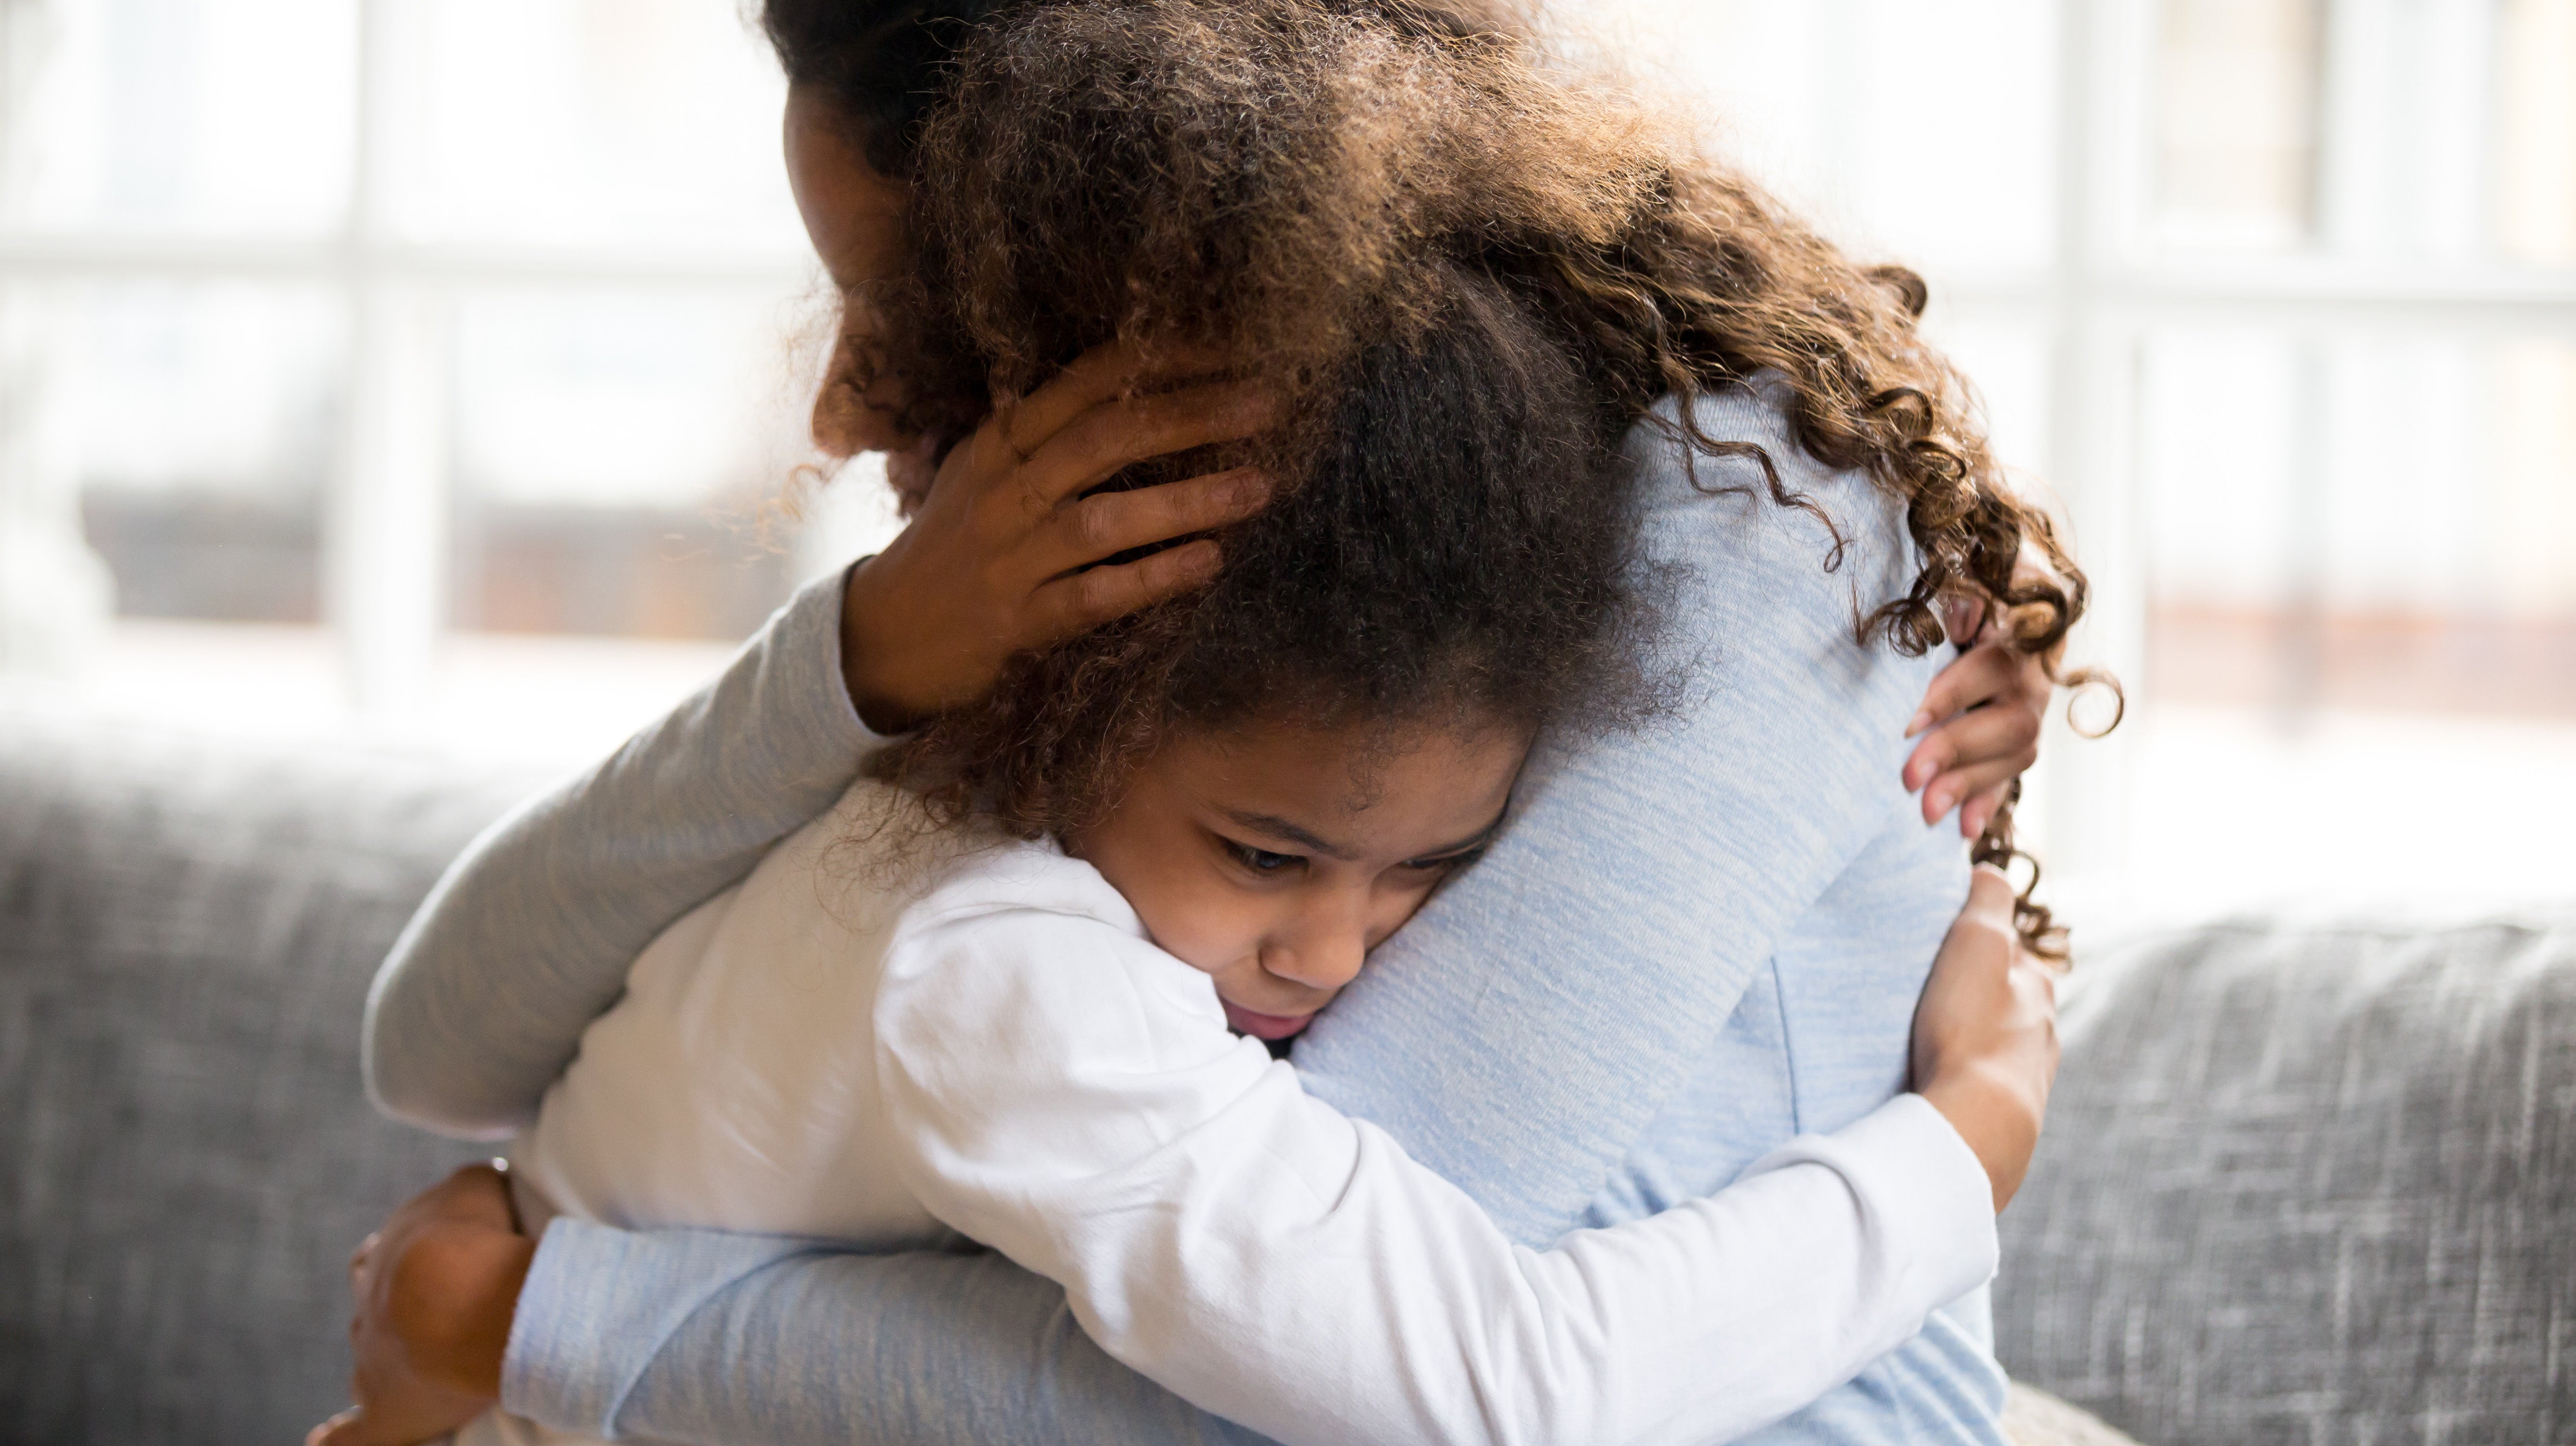 How To Care For Your Child’s Mental Health Right Now